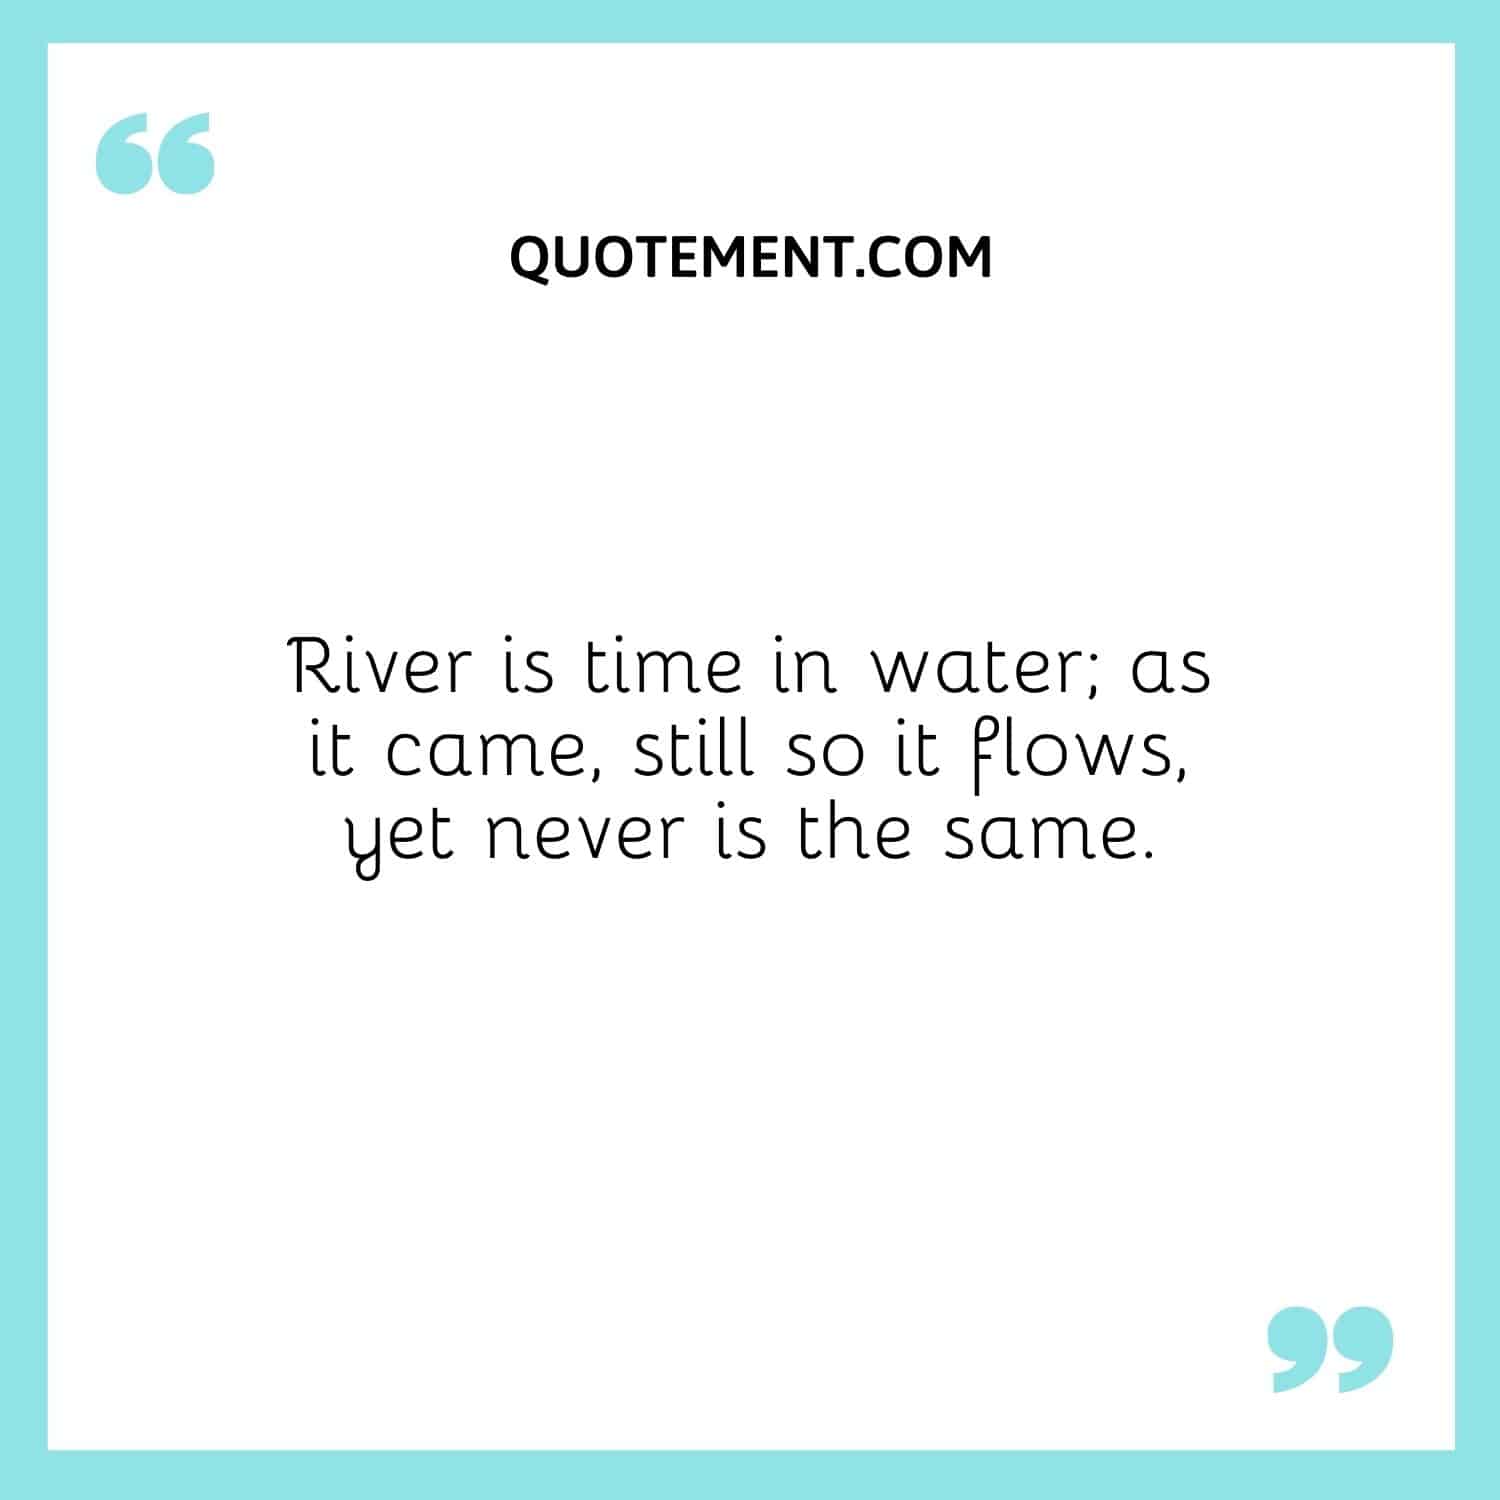 River is time in water